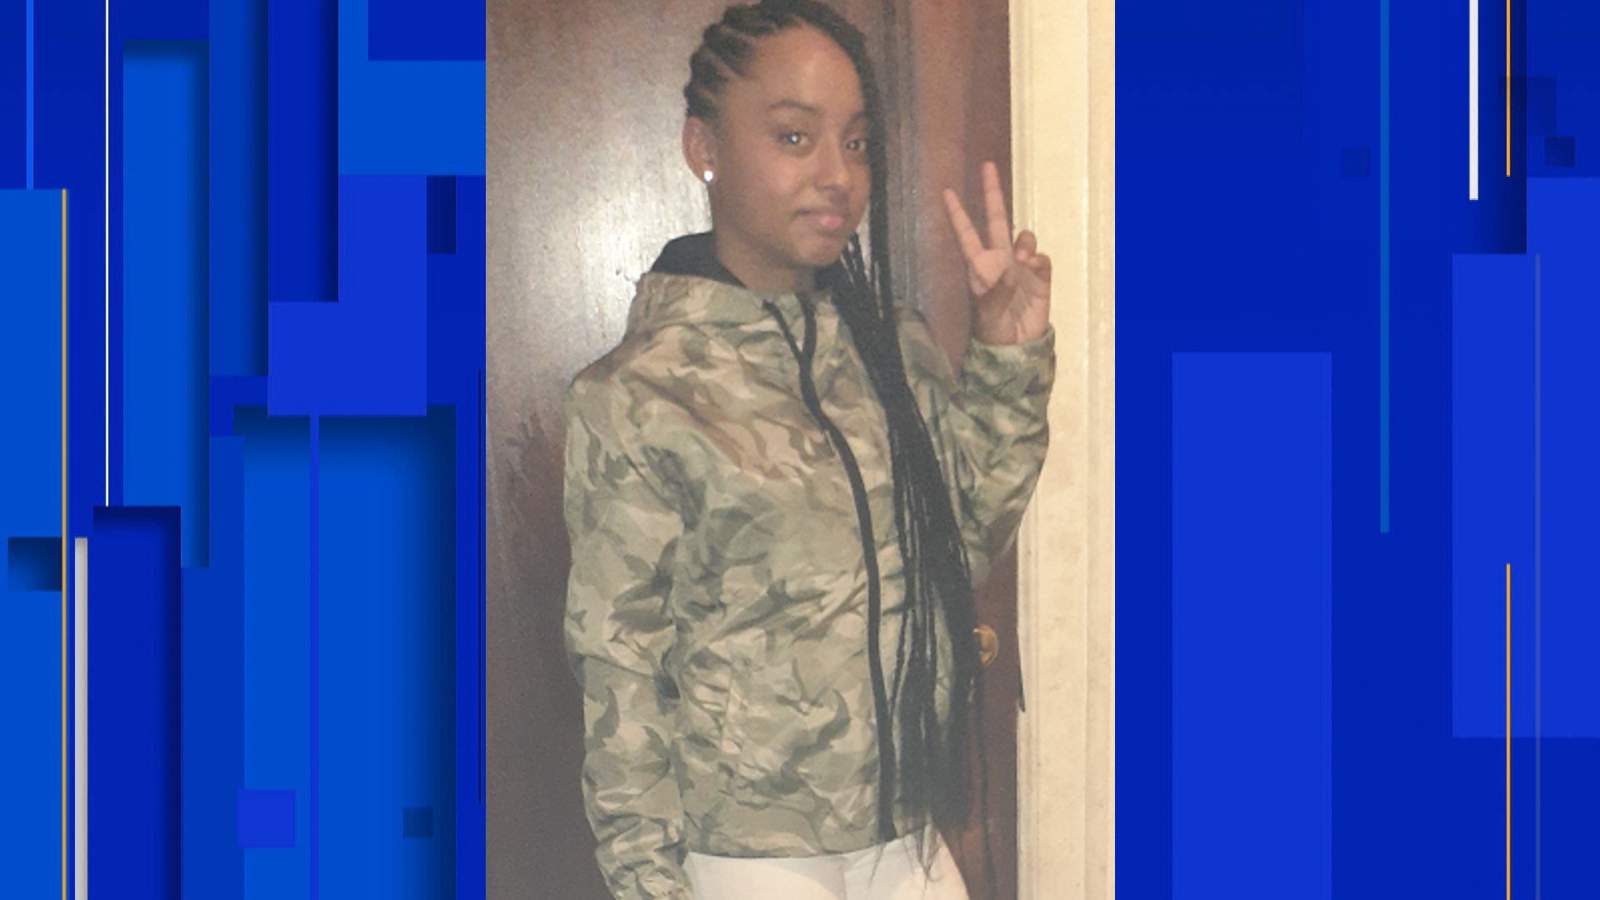 Detroit police want help finding missing 16-year-old girl last seen on Dec. 14